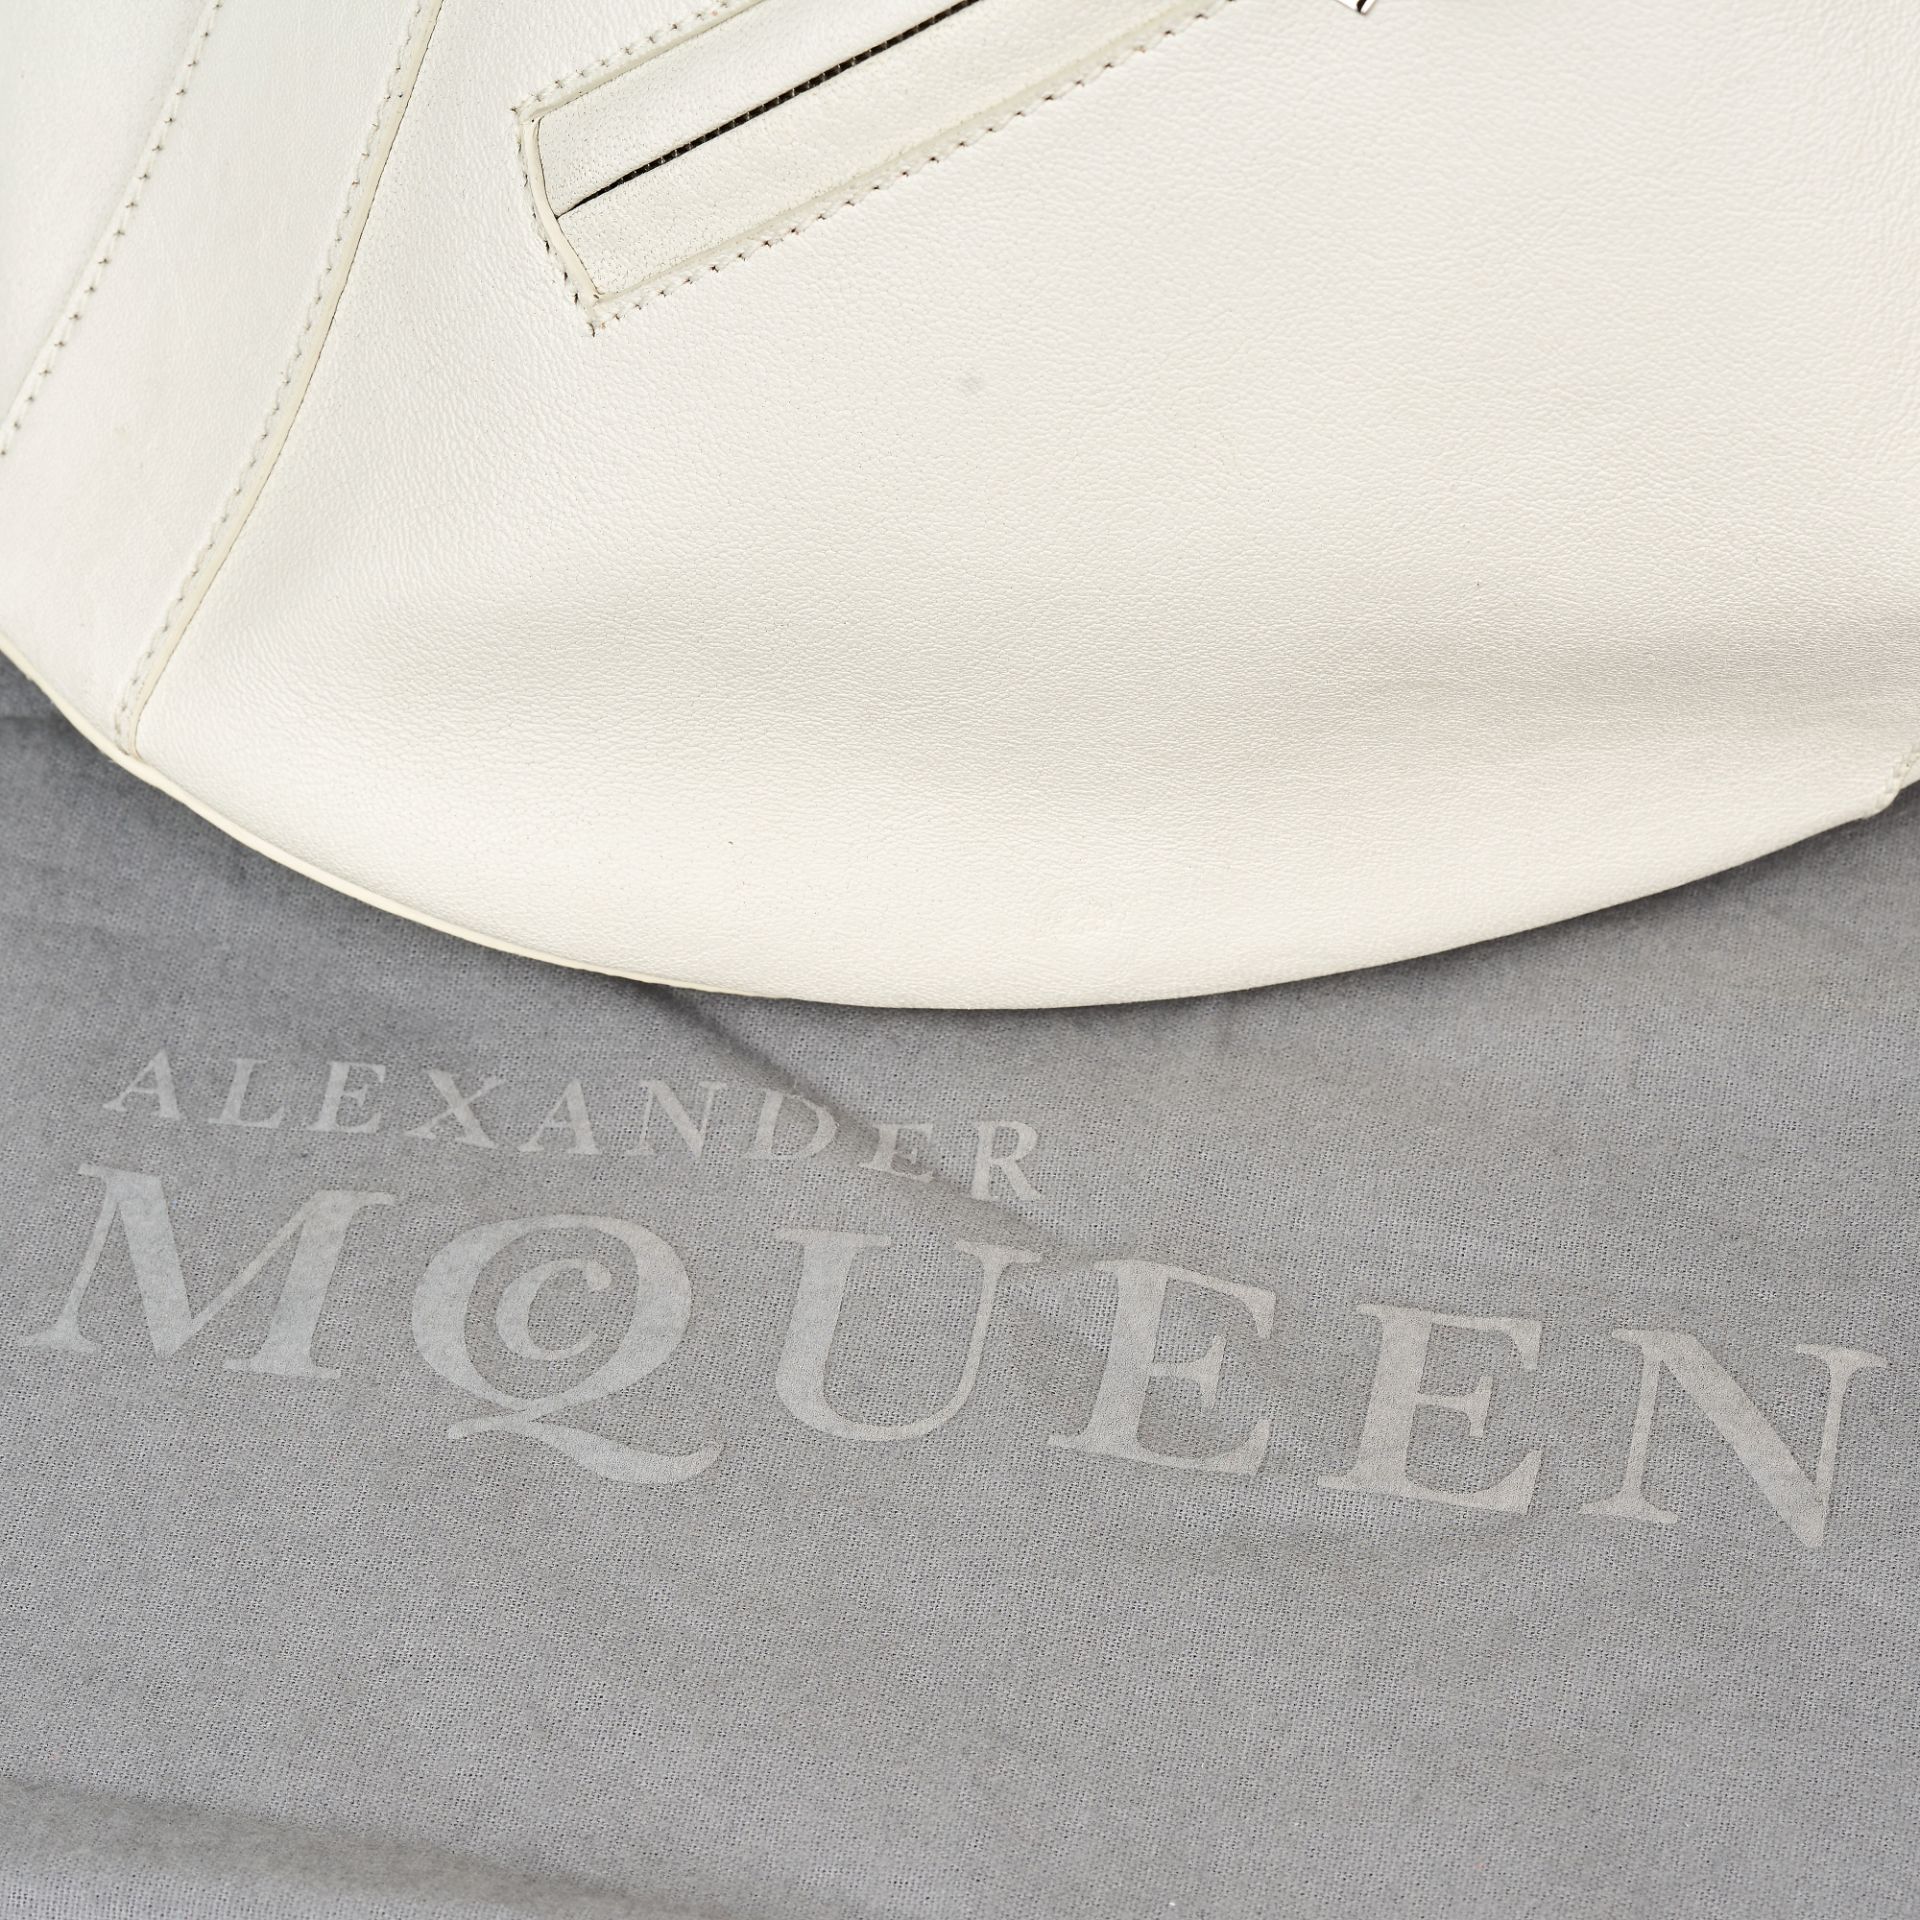 ALEXANDER MCQUEEN WHITE LEATHER BUCKET BAG - Image 4 of 4